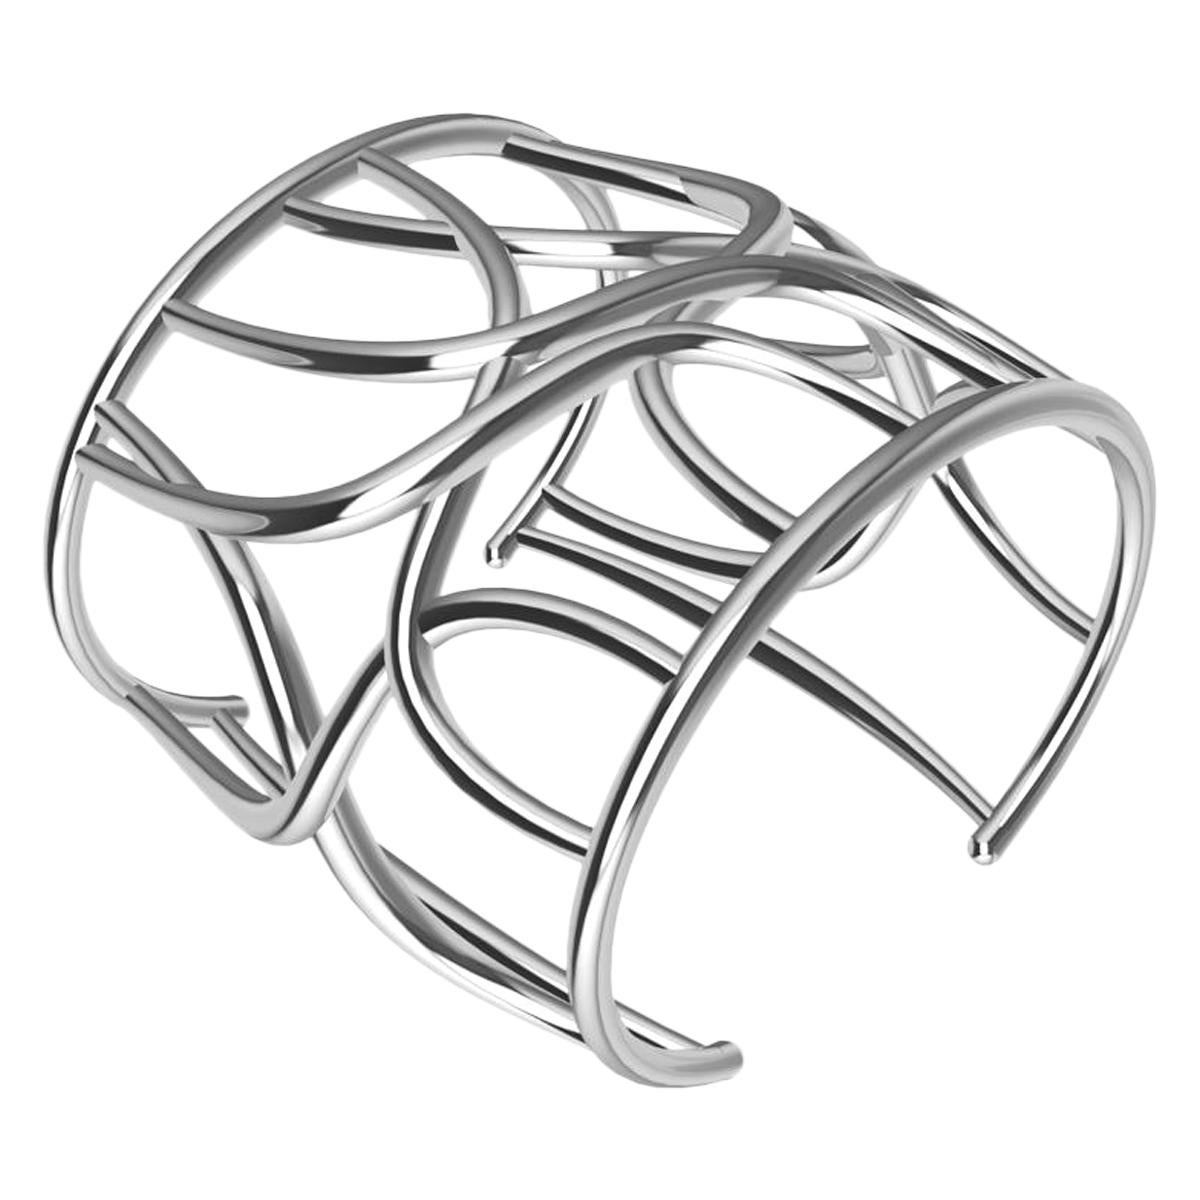  Sterling  Cuff Bracelet, October the best month to launch the Octopus Cuff. So what Summer's over, you can still create your own waves this winter with this bracelet. Organic lines of waves rolling over your wrist. Warm up your dreary days with a